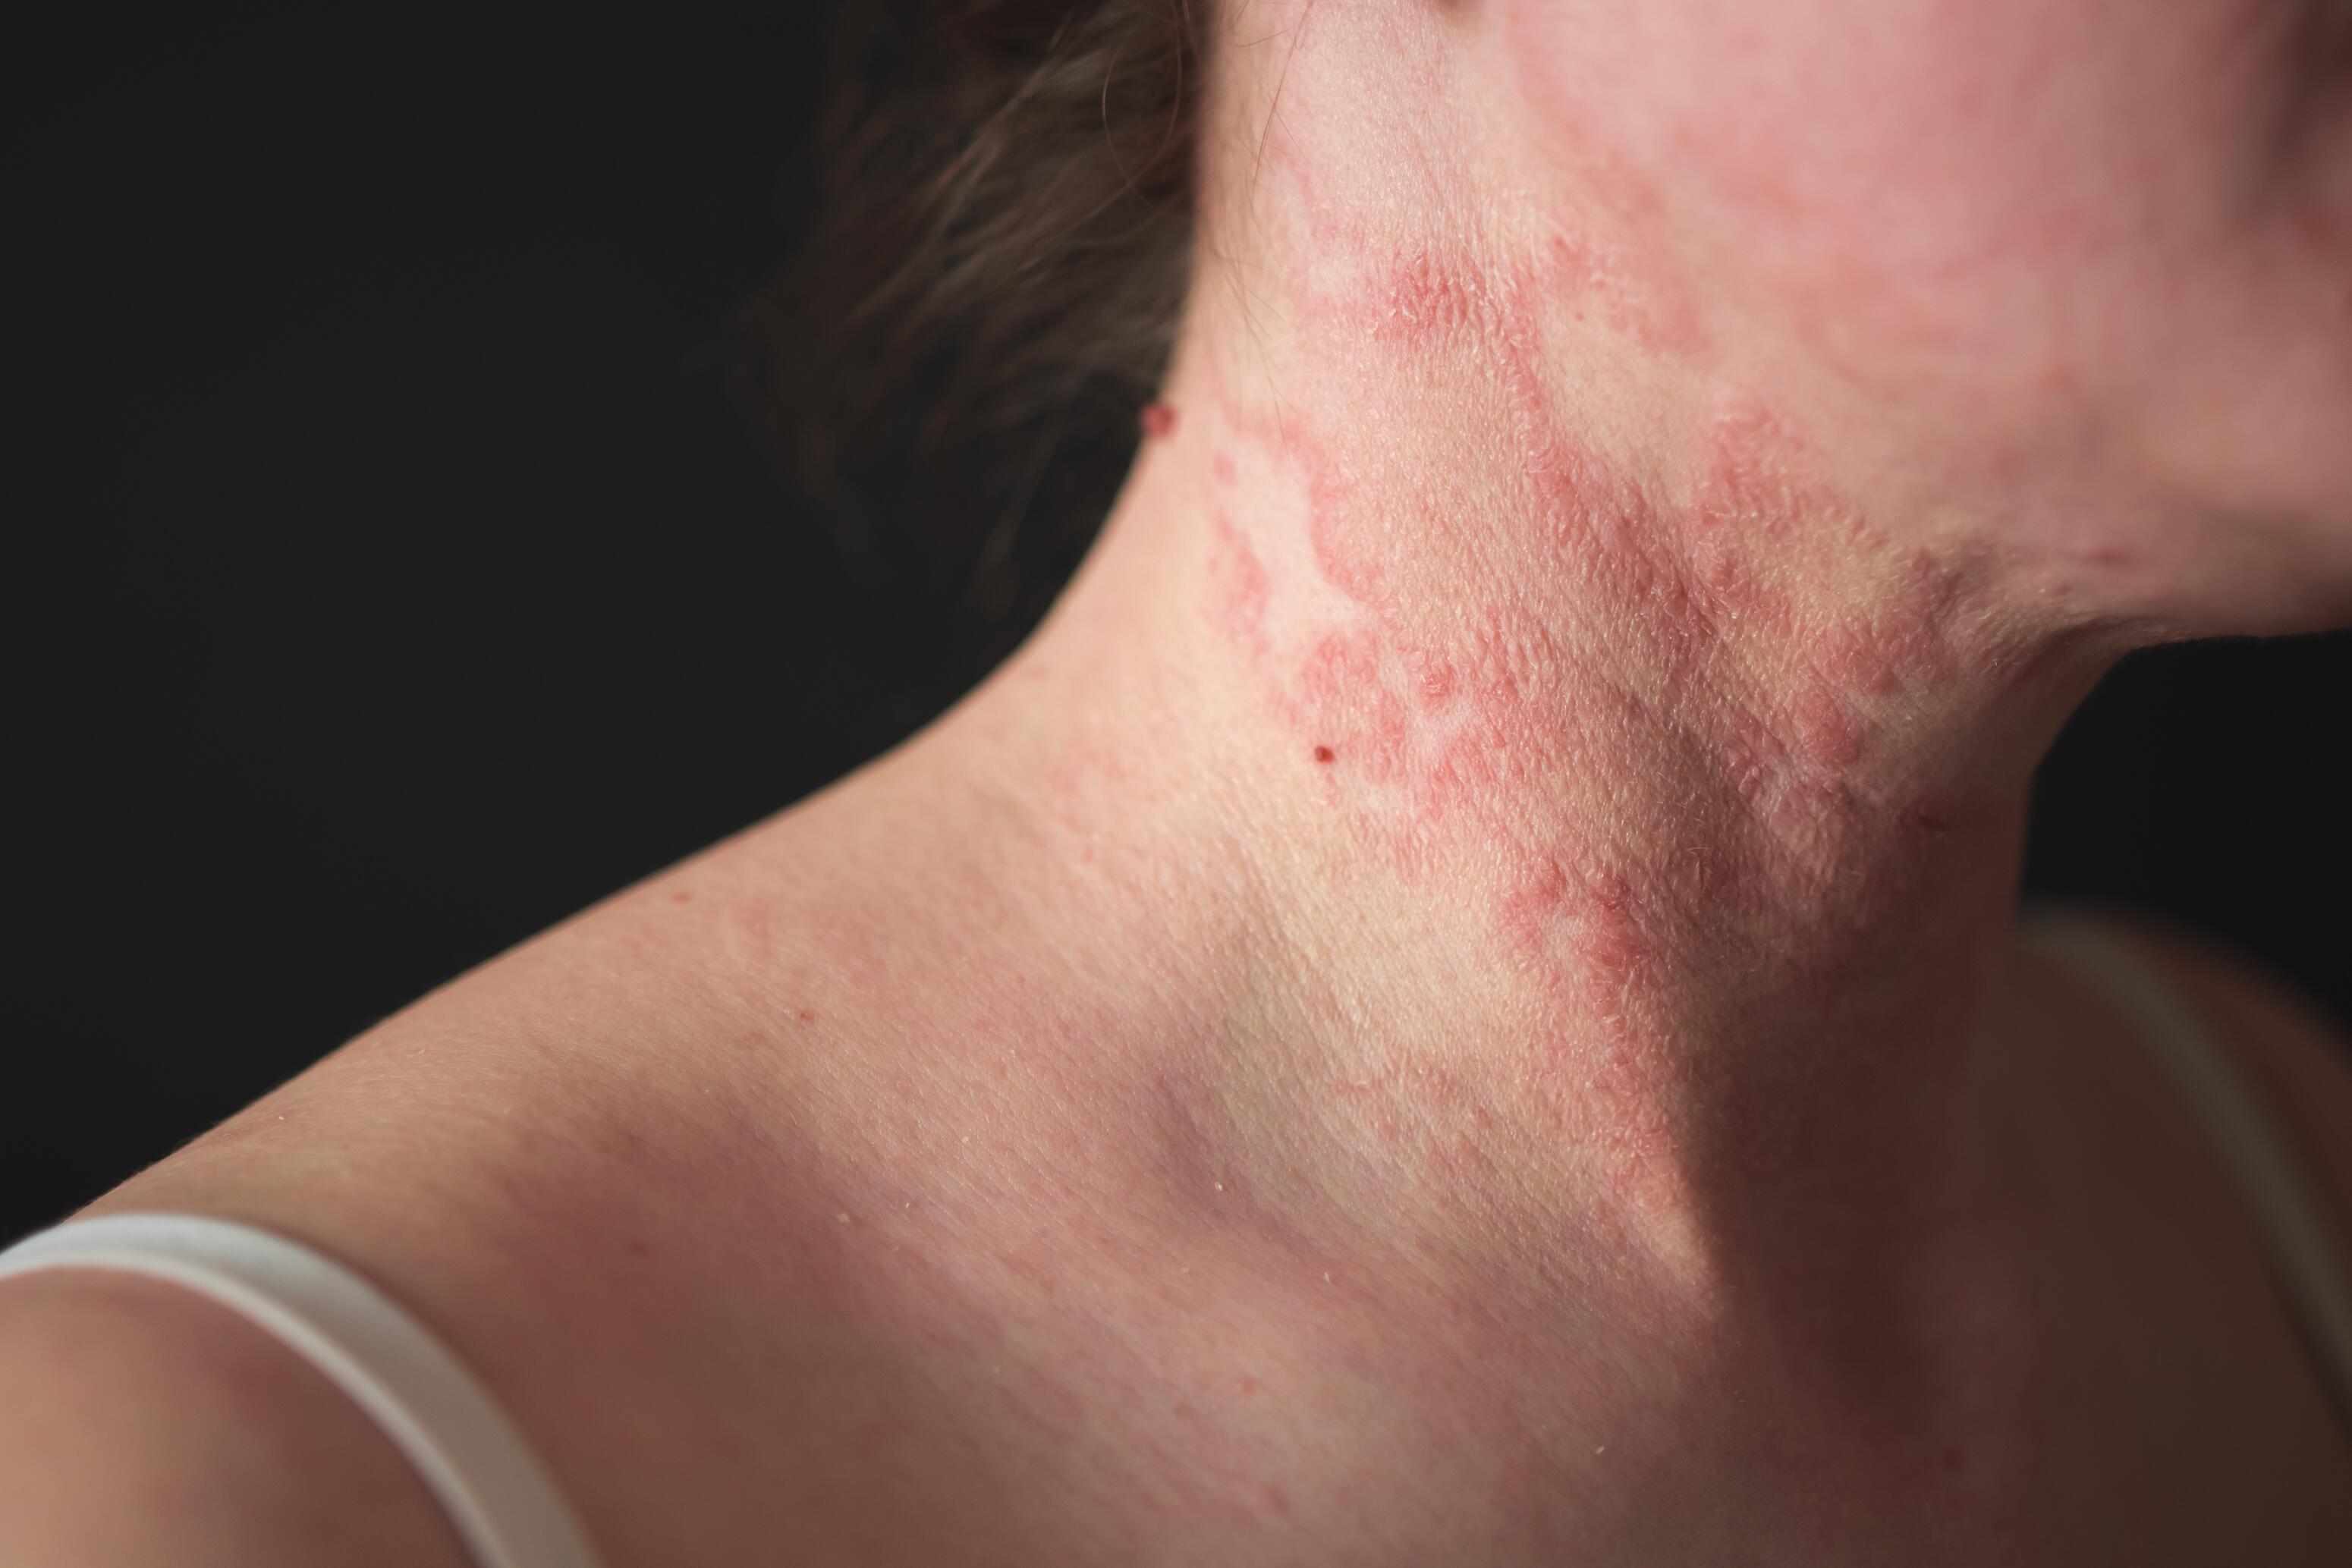 Neck of a woman with a flare-up of eczema patches